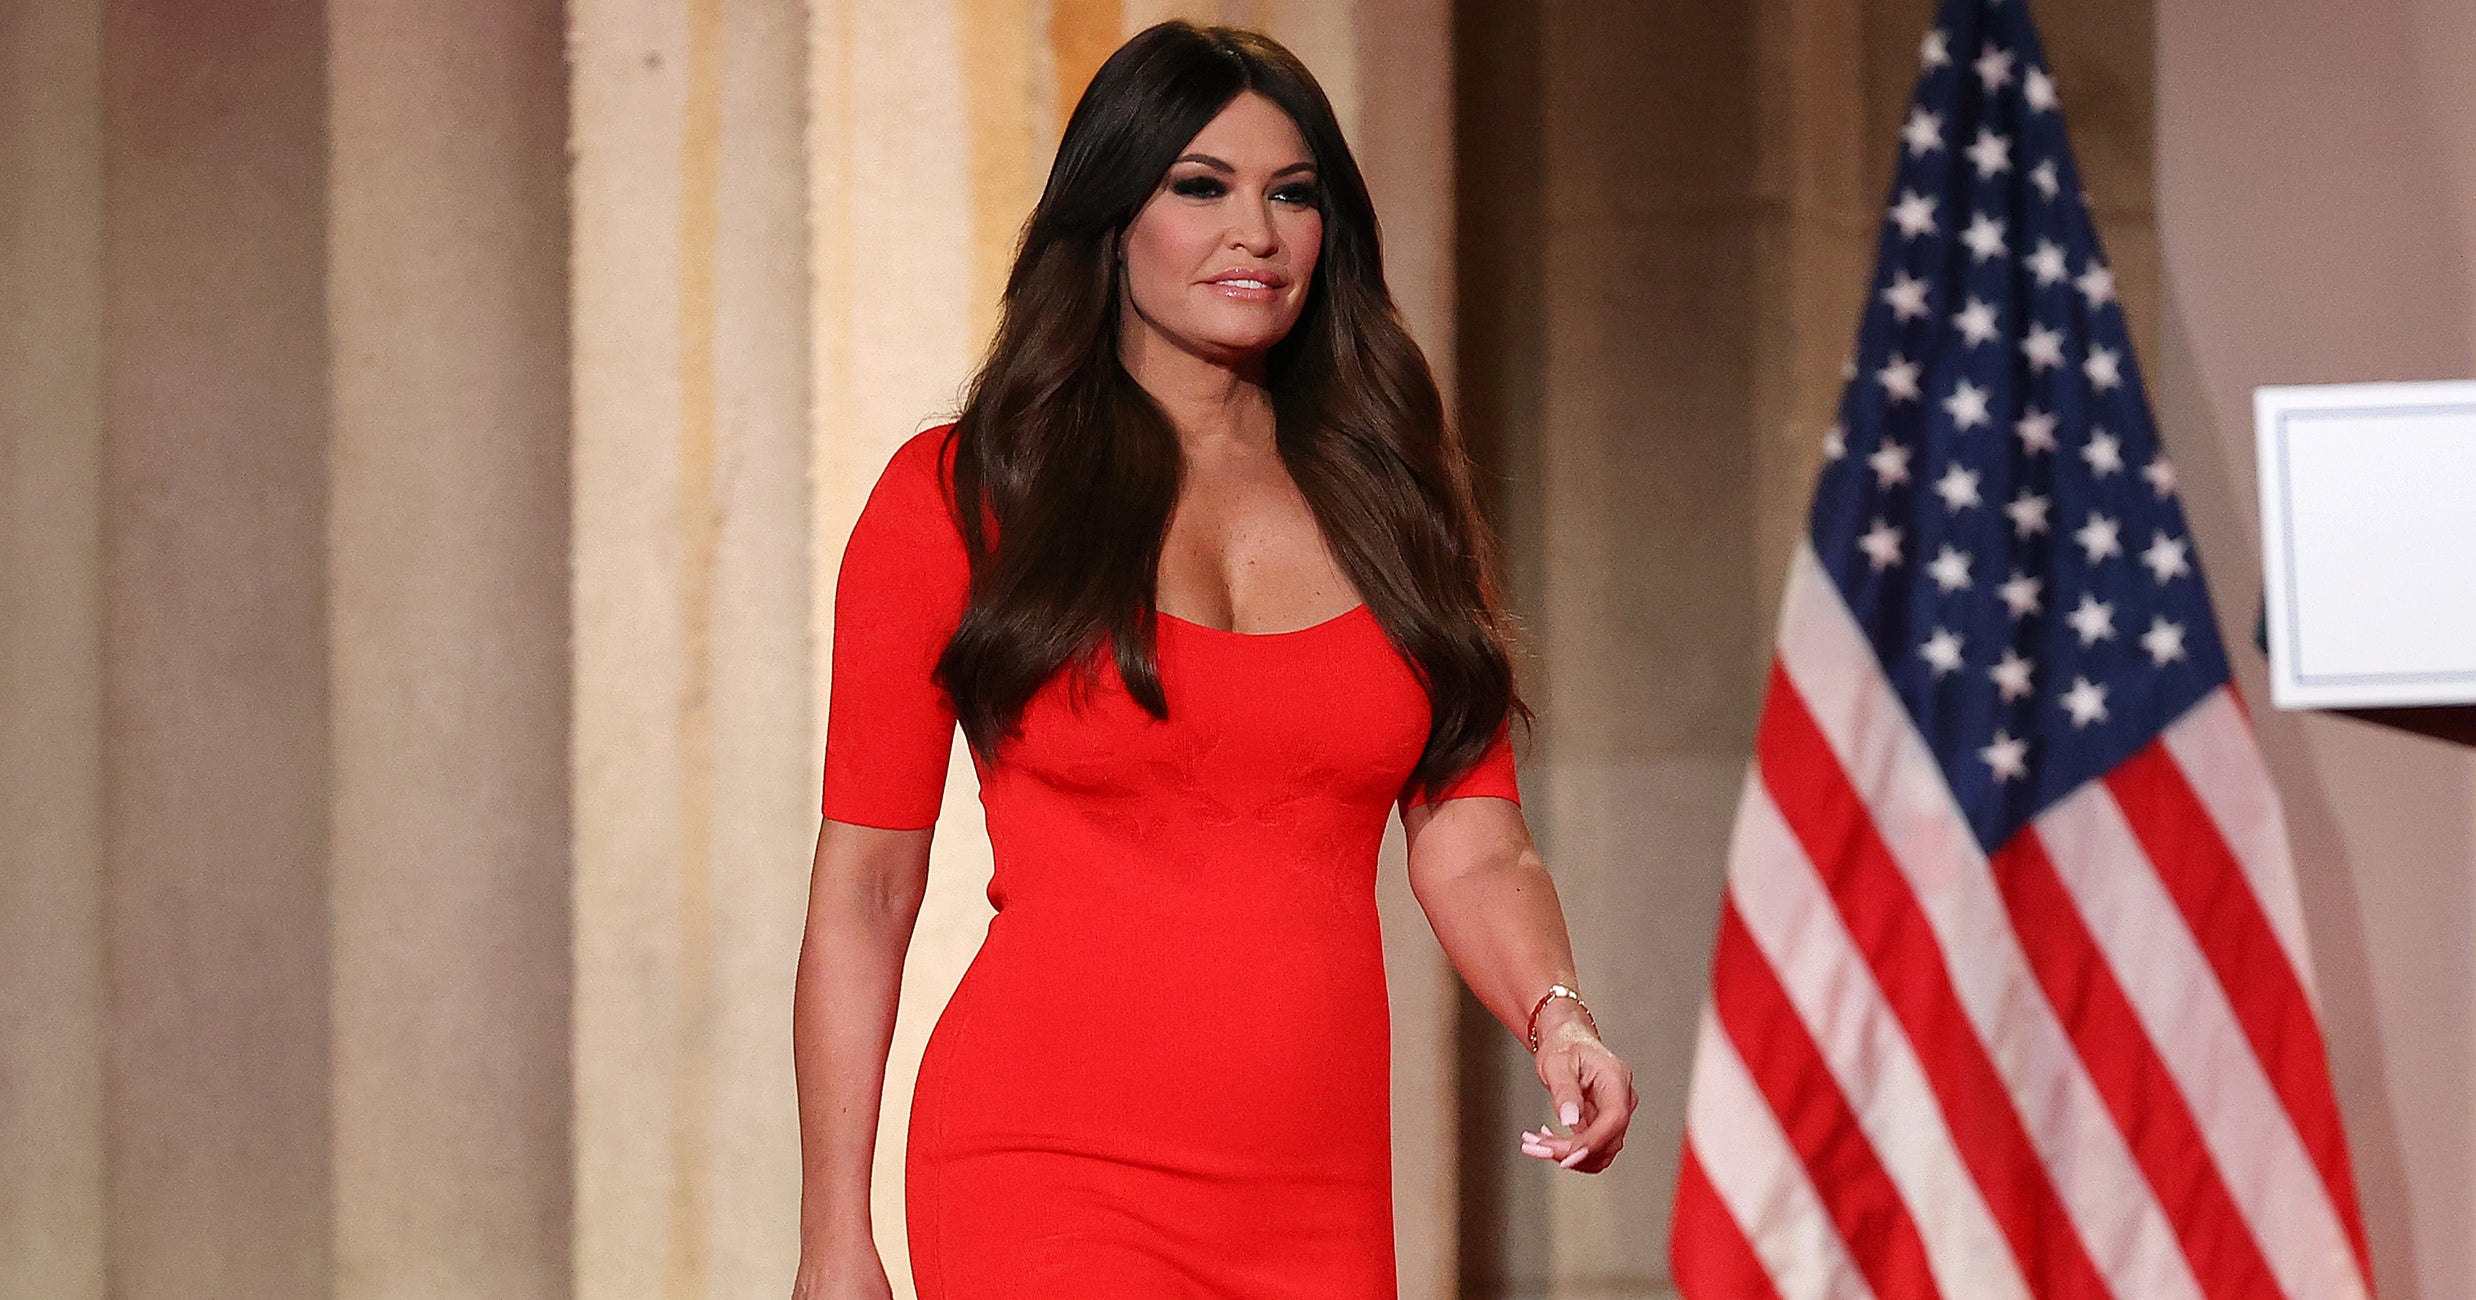 Kimberly Guilfoyle Porn Sucks - Whats In Kimberly Guilfoyle Sexual Harassment Complaint